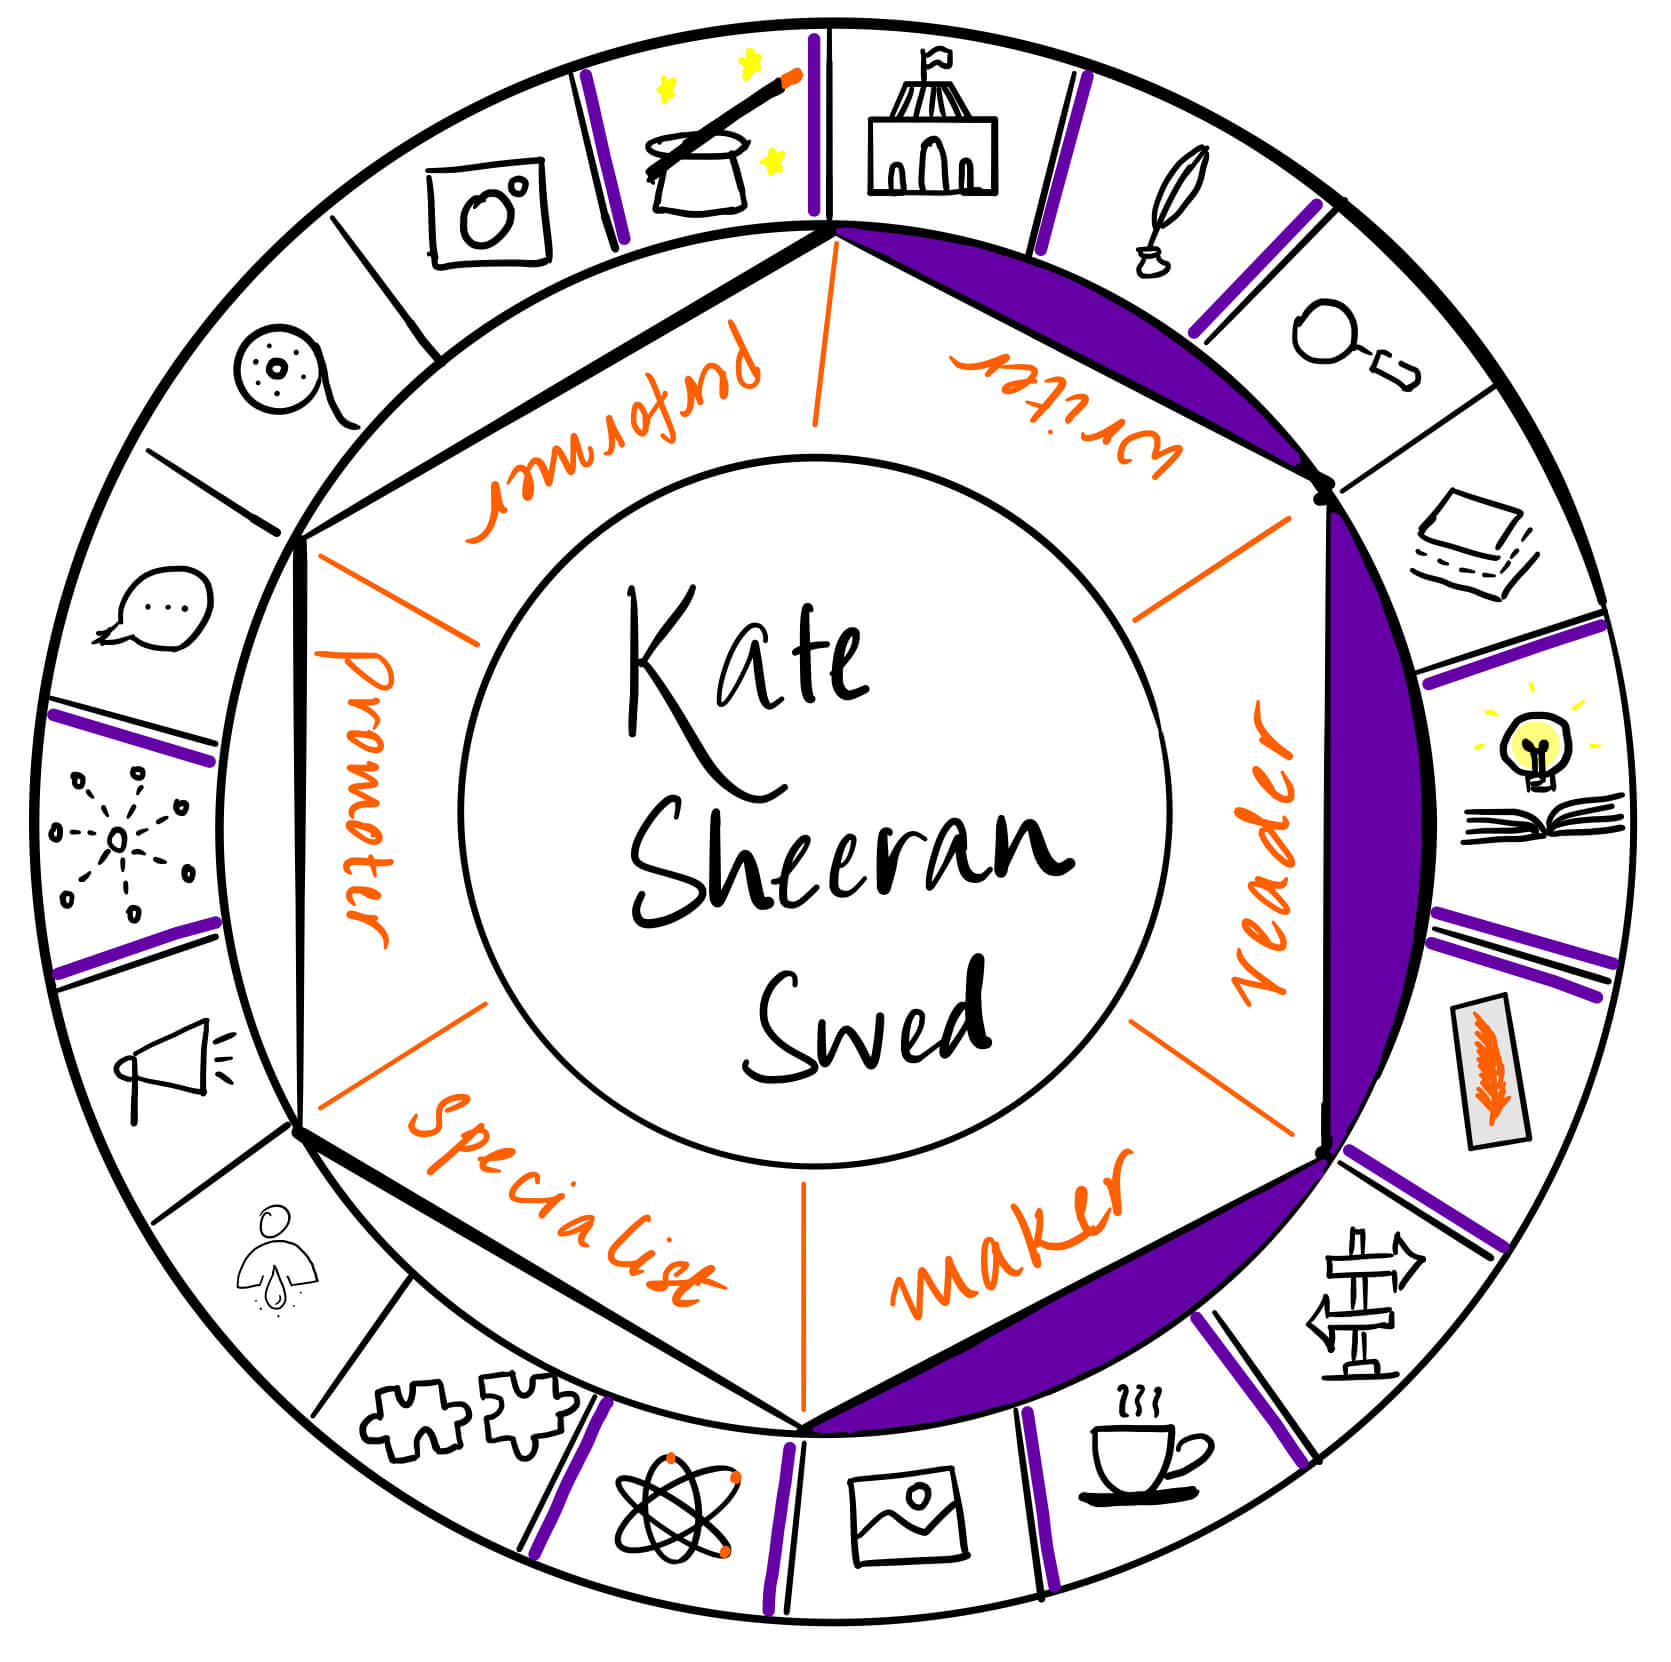 Kate Sheeran Swed is a writer, reader and maker. It's a pleasure to have her over on The Creator's Roulette to talk about her love for retelling classics and what it takes to write them.